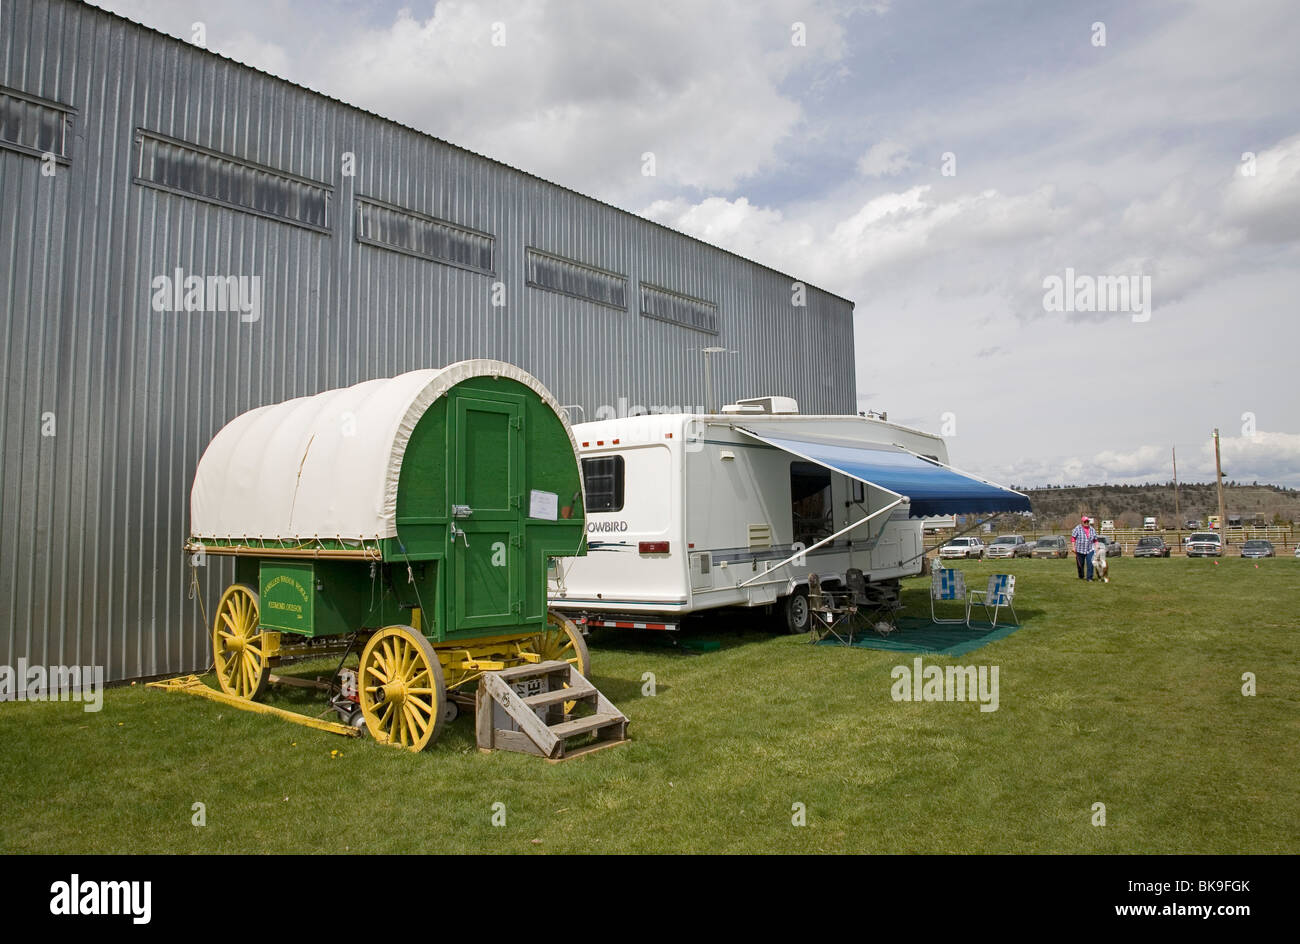 Rving then and now. A Basque sheep herder's wagon and a 5th wheel RV camper Stock Photo